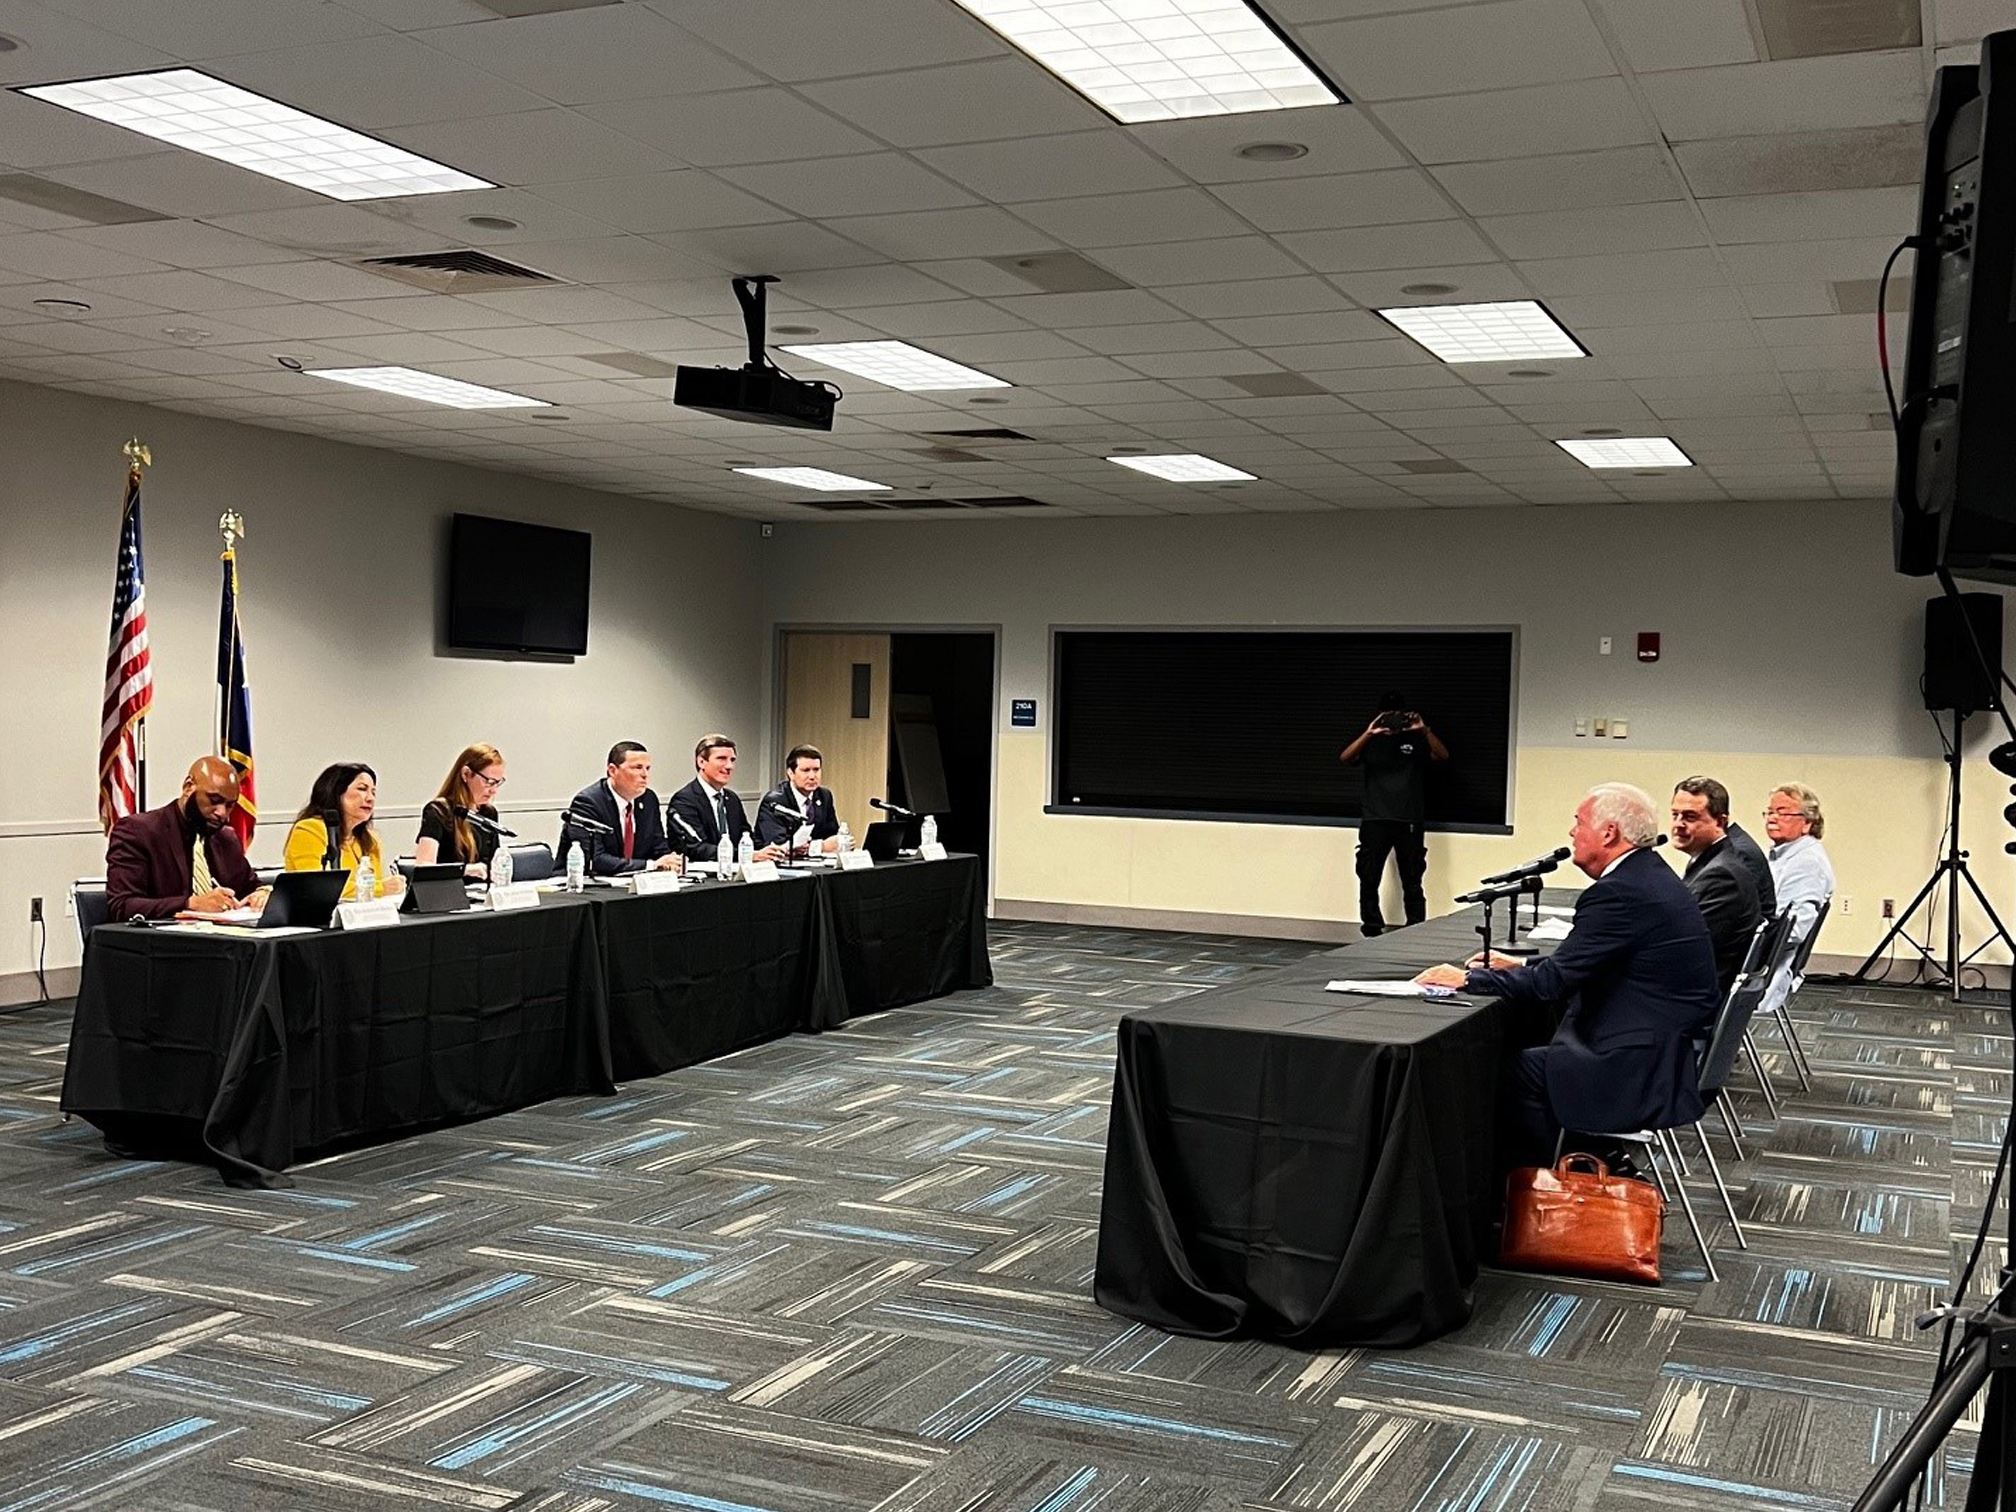 Commissioner Christian testifying before the House Select Committee on Protecting Texas LNG Exports at Lamar State College in Port Arthur, TX.